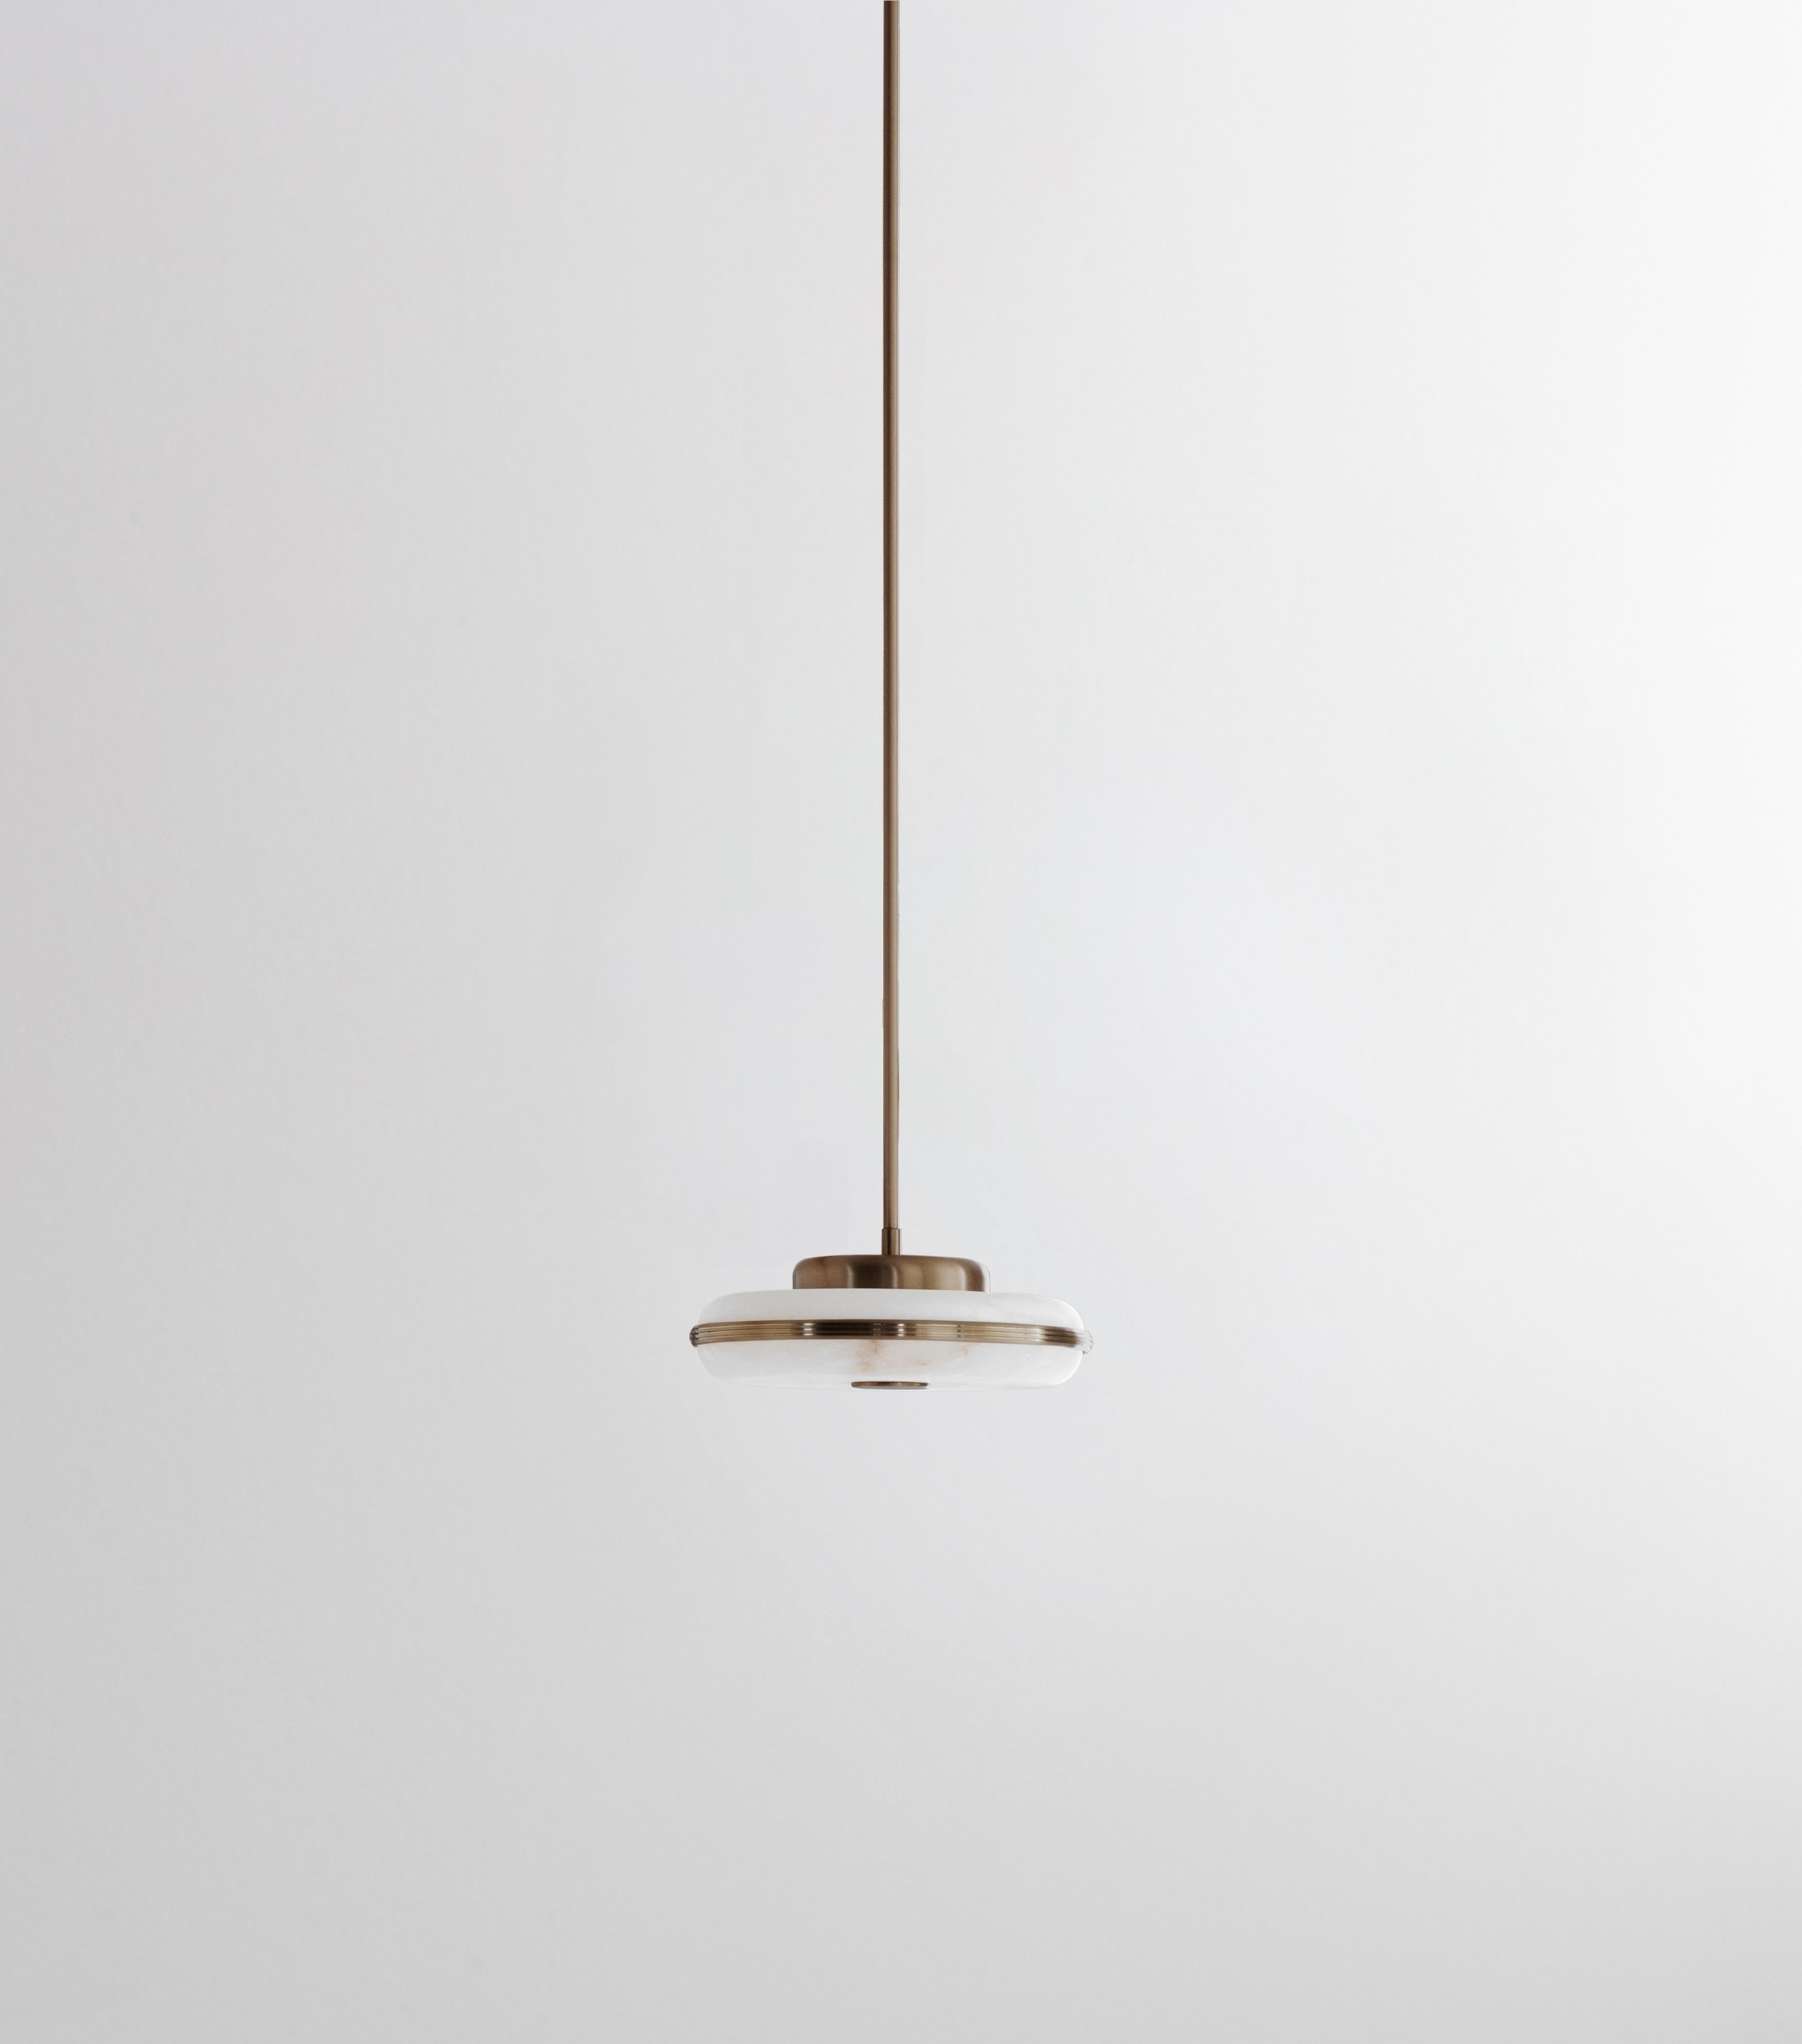 Beran Antique Brass Small Pendant Lamp by Bert Frank
Dimensions: Ø 26 x H 6 cm. 
Materials: Brass and alabaster.

Available in two different sizes. Available in different finishes and materials. Height is customized to order. Please contact us.